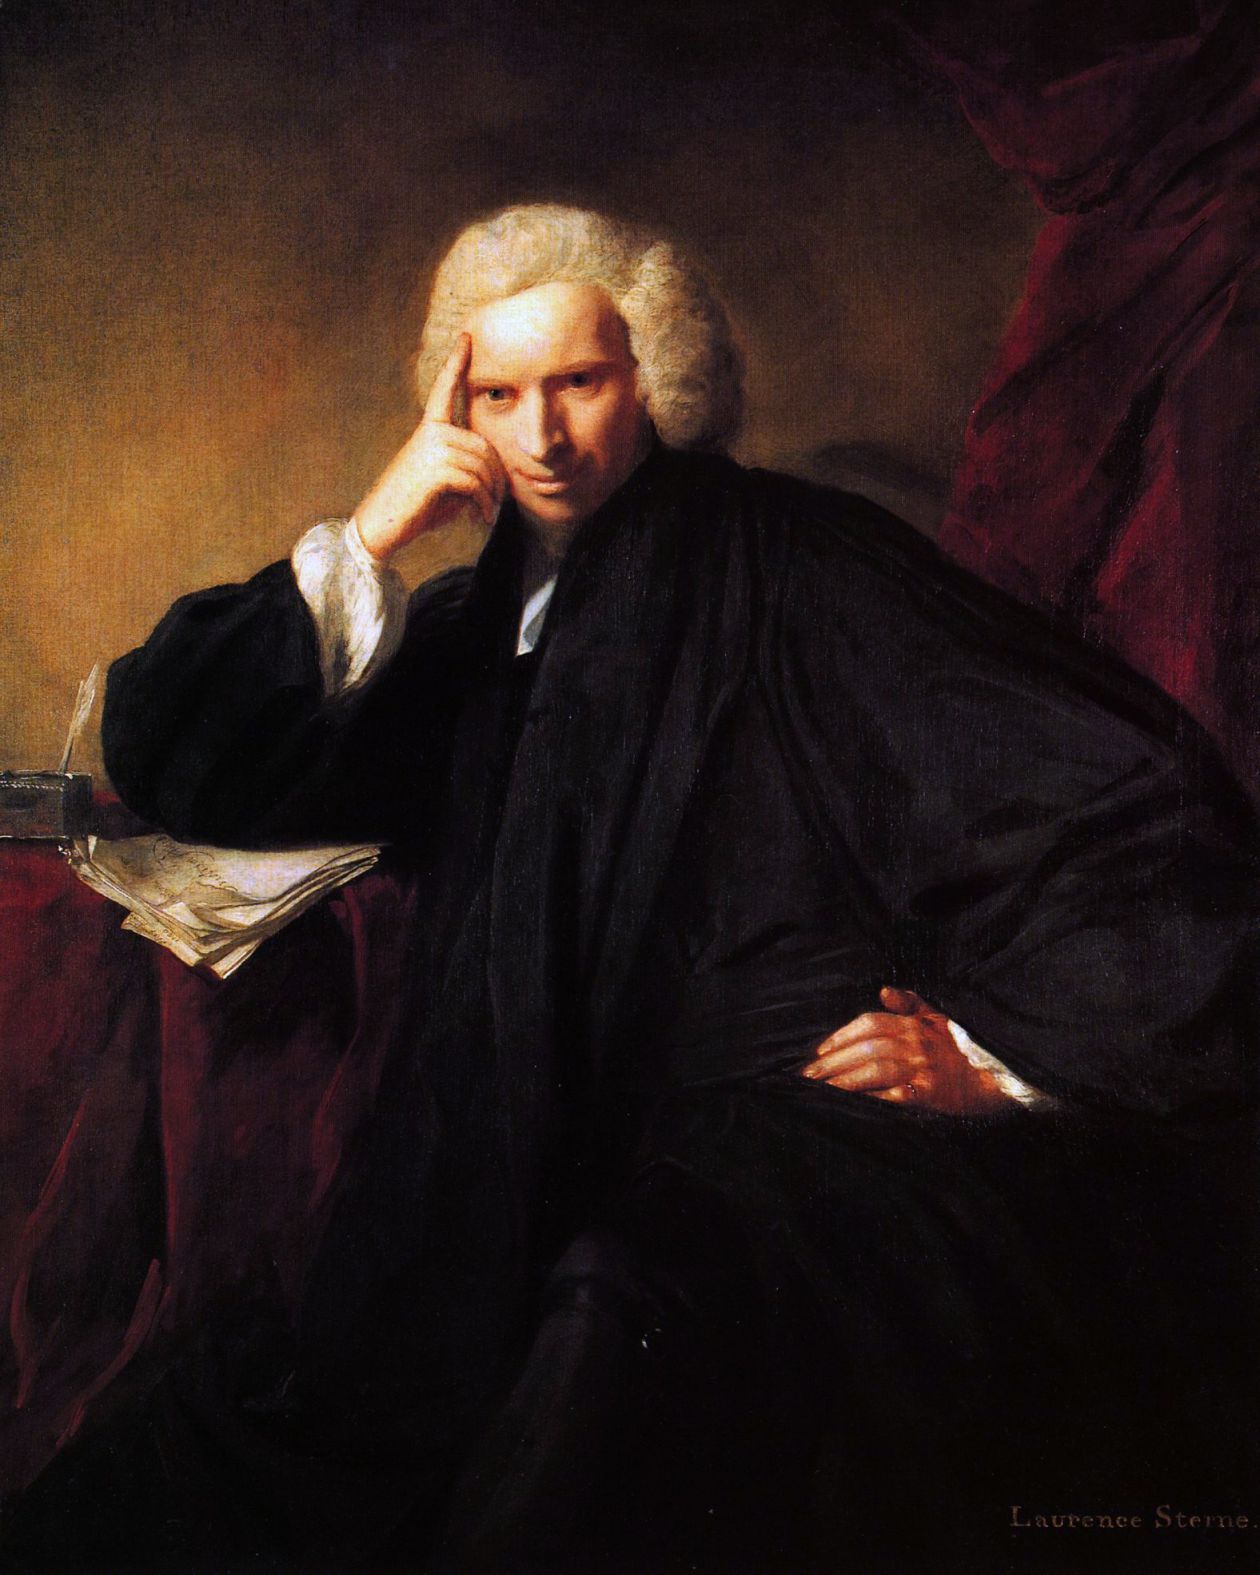 Painting of Laurence Sterne